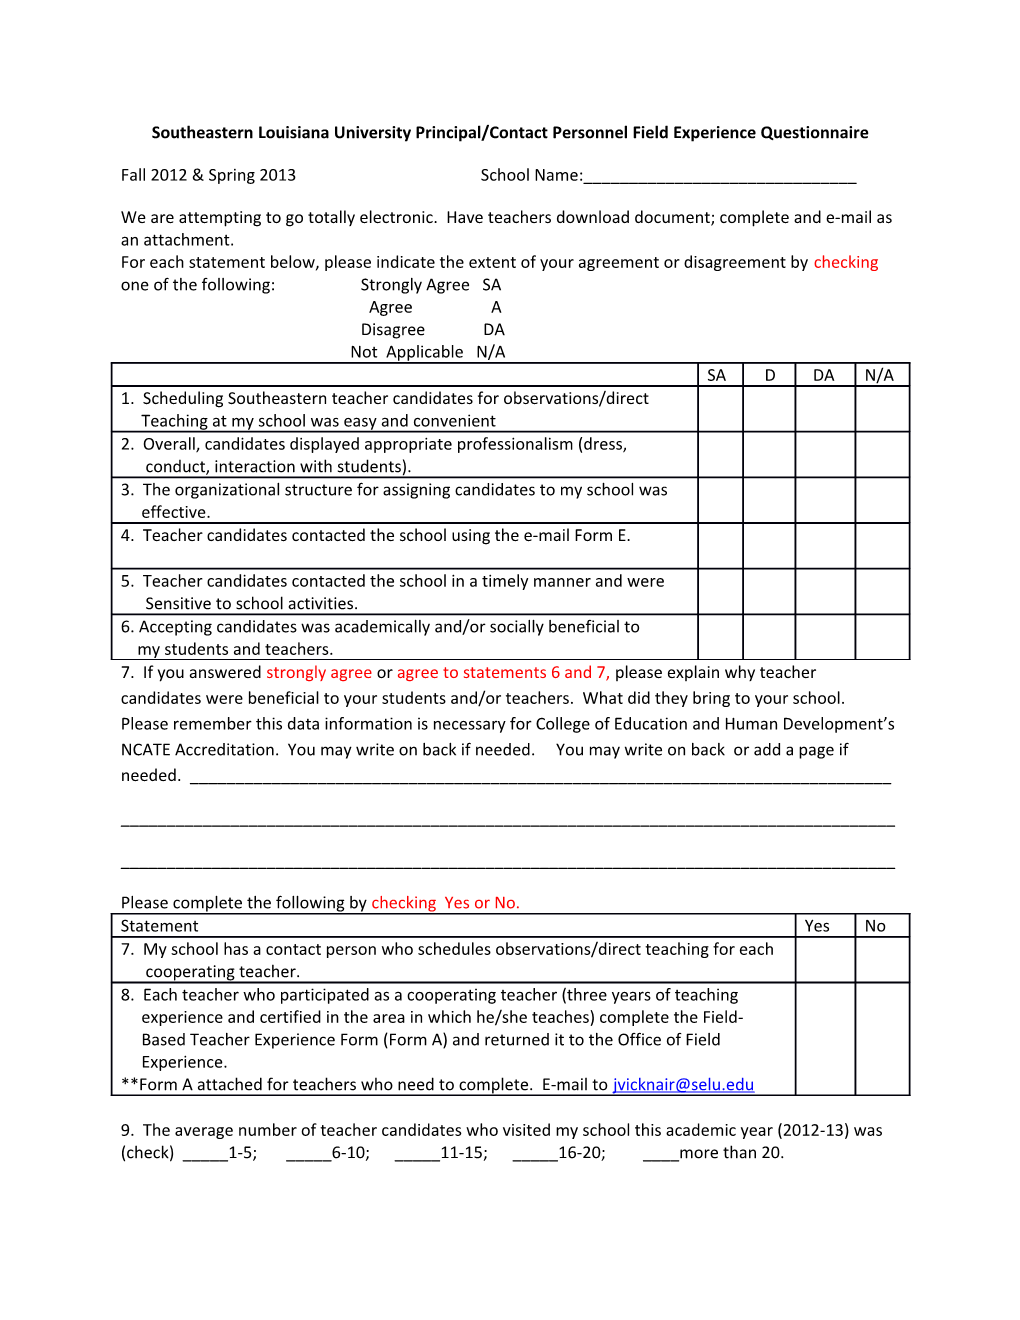 Southeastern Louisiana University Principal/Contact Personnel Field Experience Questionnaire